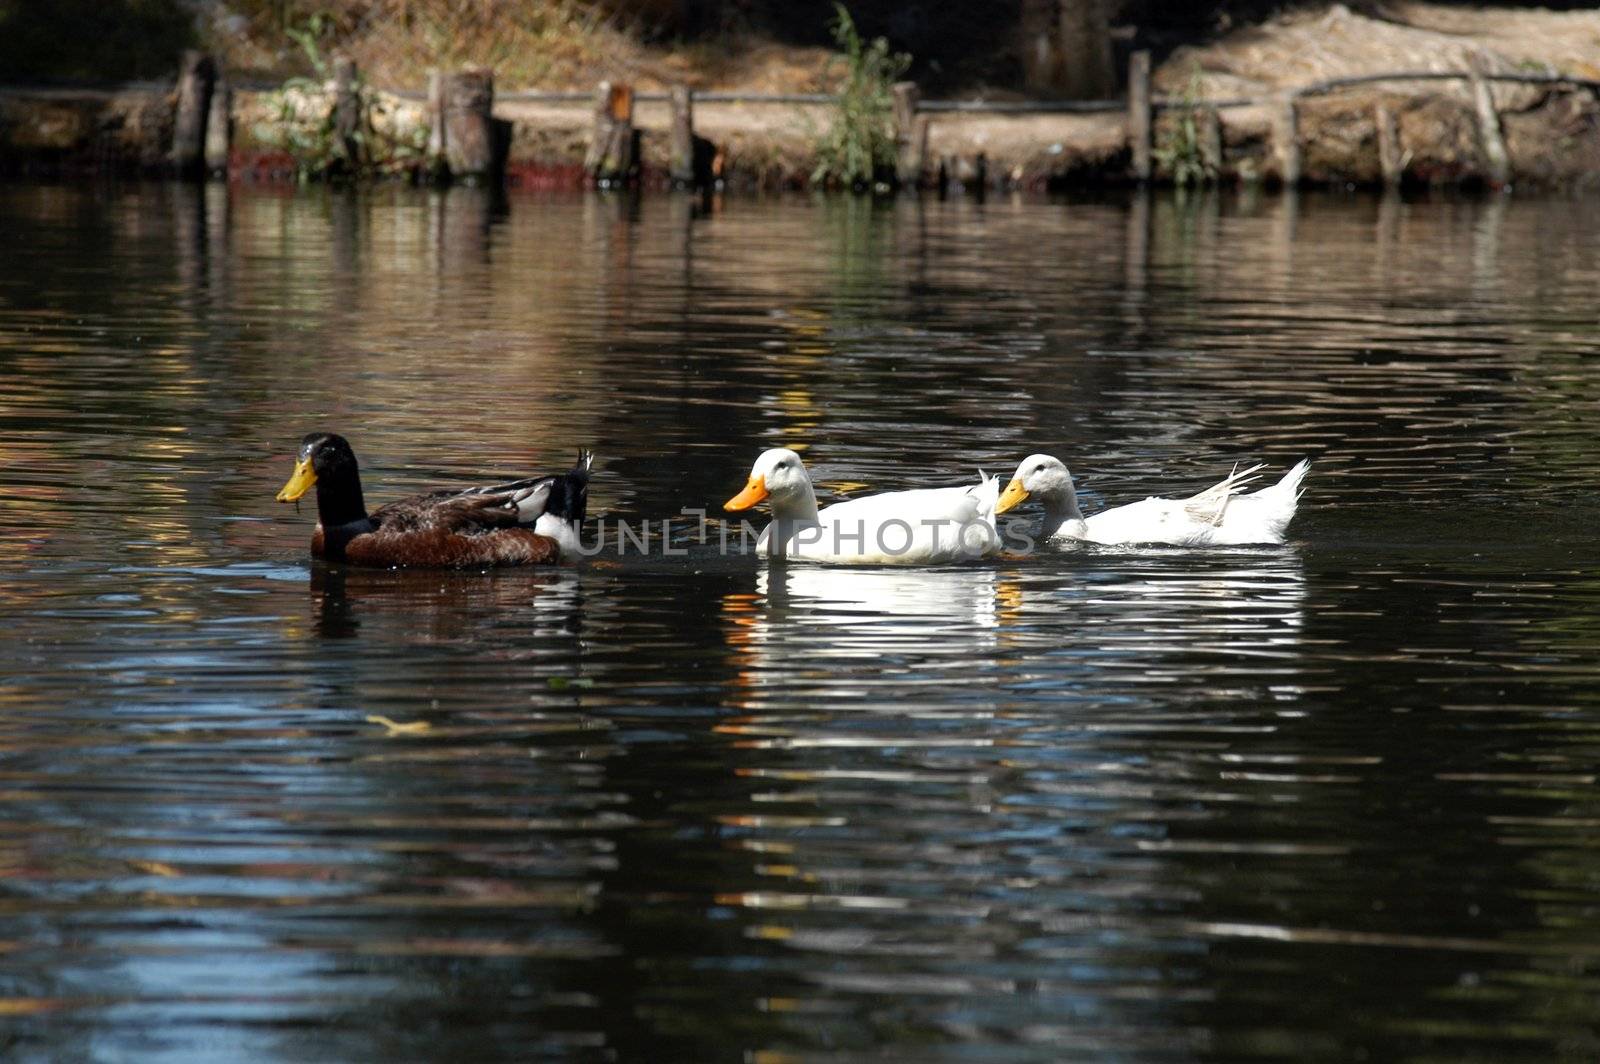 A group of ducks swimming on the river in Mexico city